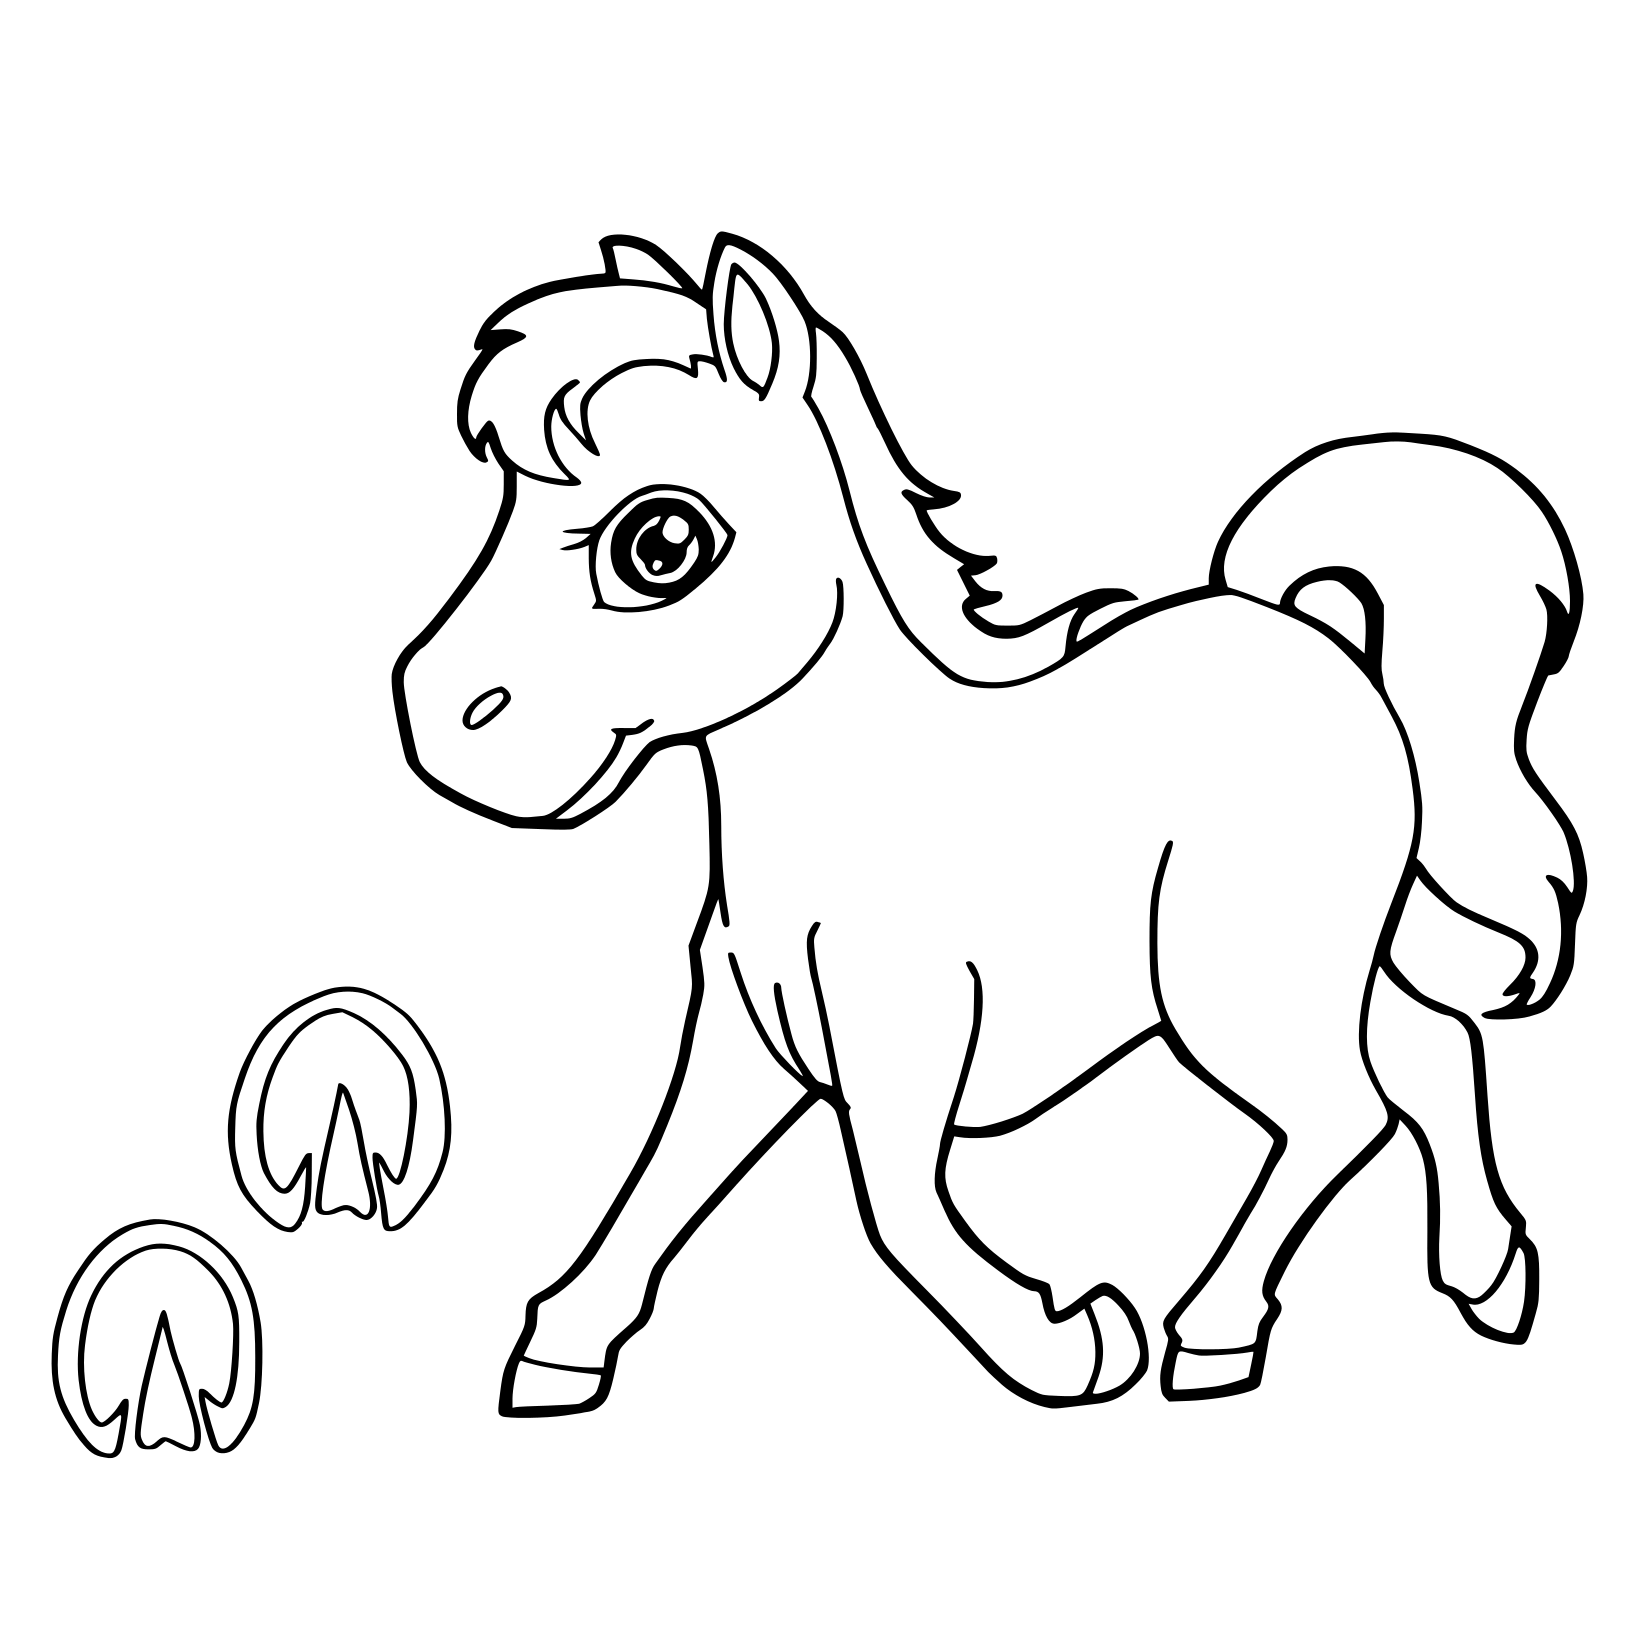 Paw Print With Horse Kid Coloring Page